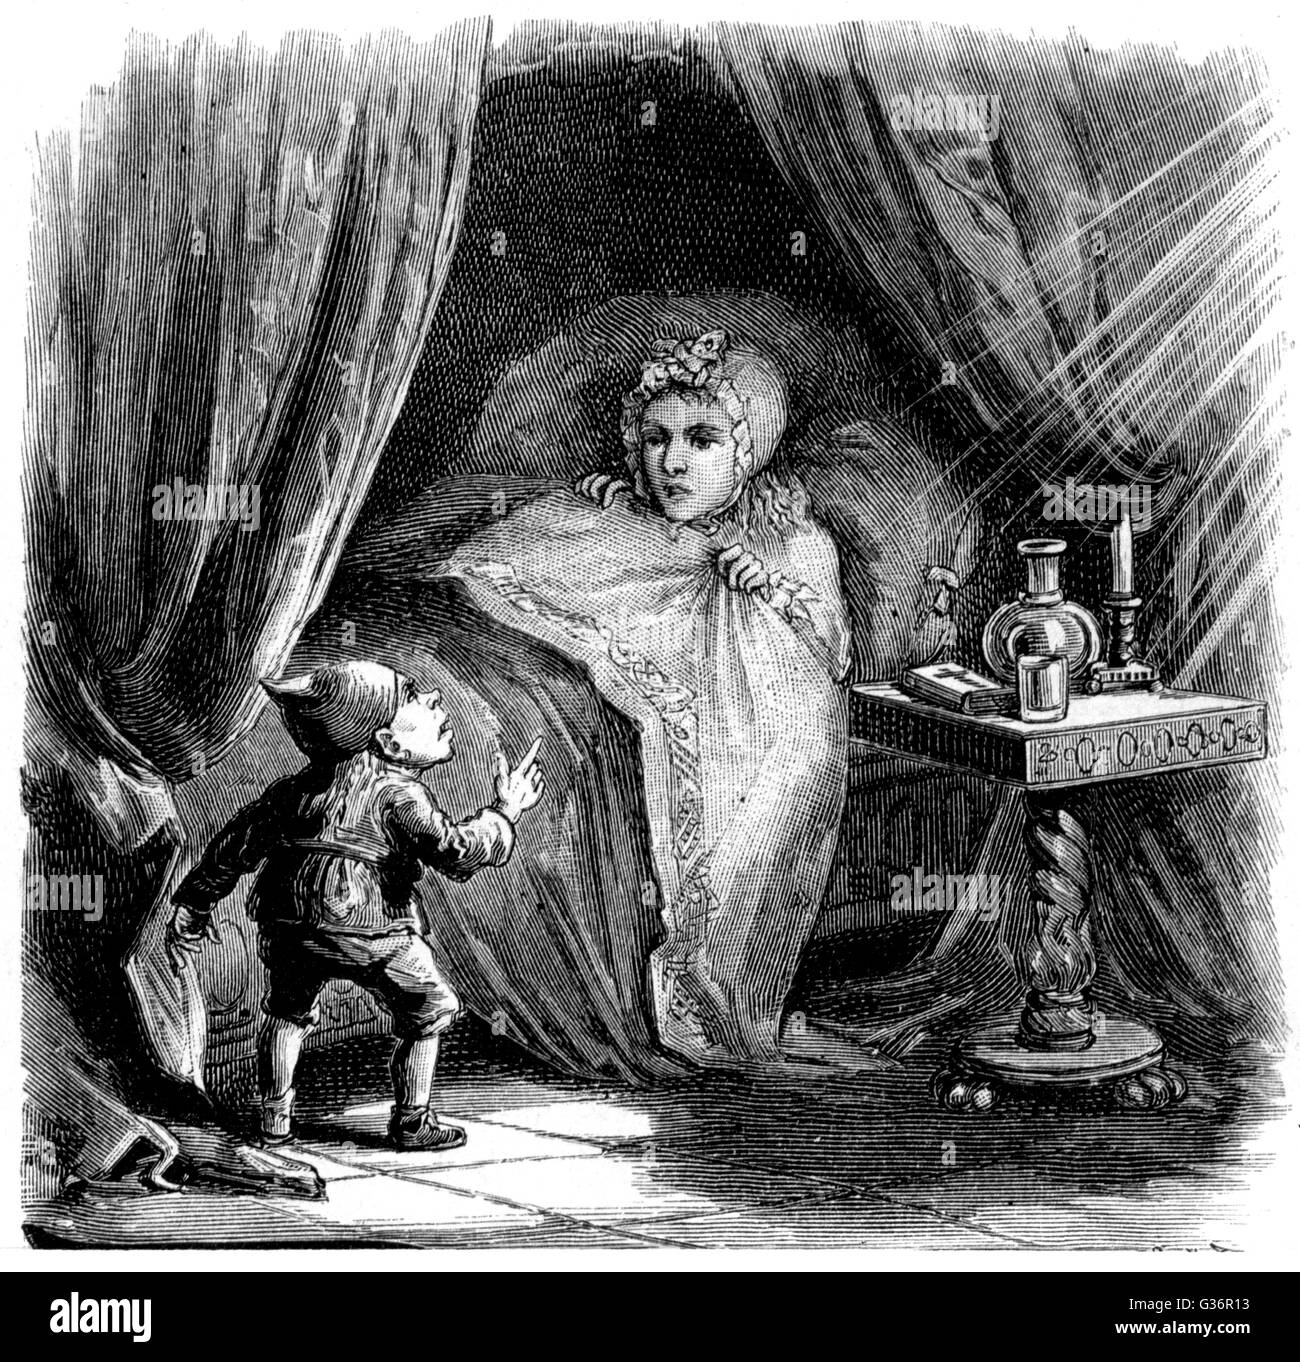 A Swedish Nisse surprises a girl in her bedroom.      Date: 1882 Stock Photo